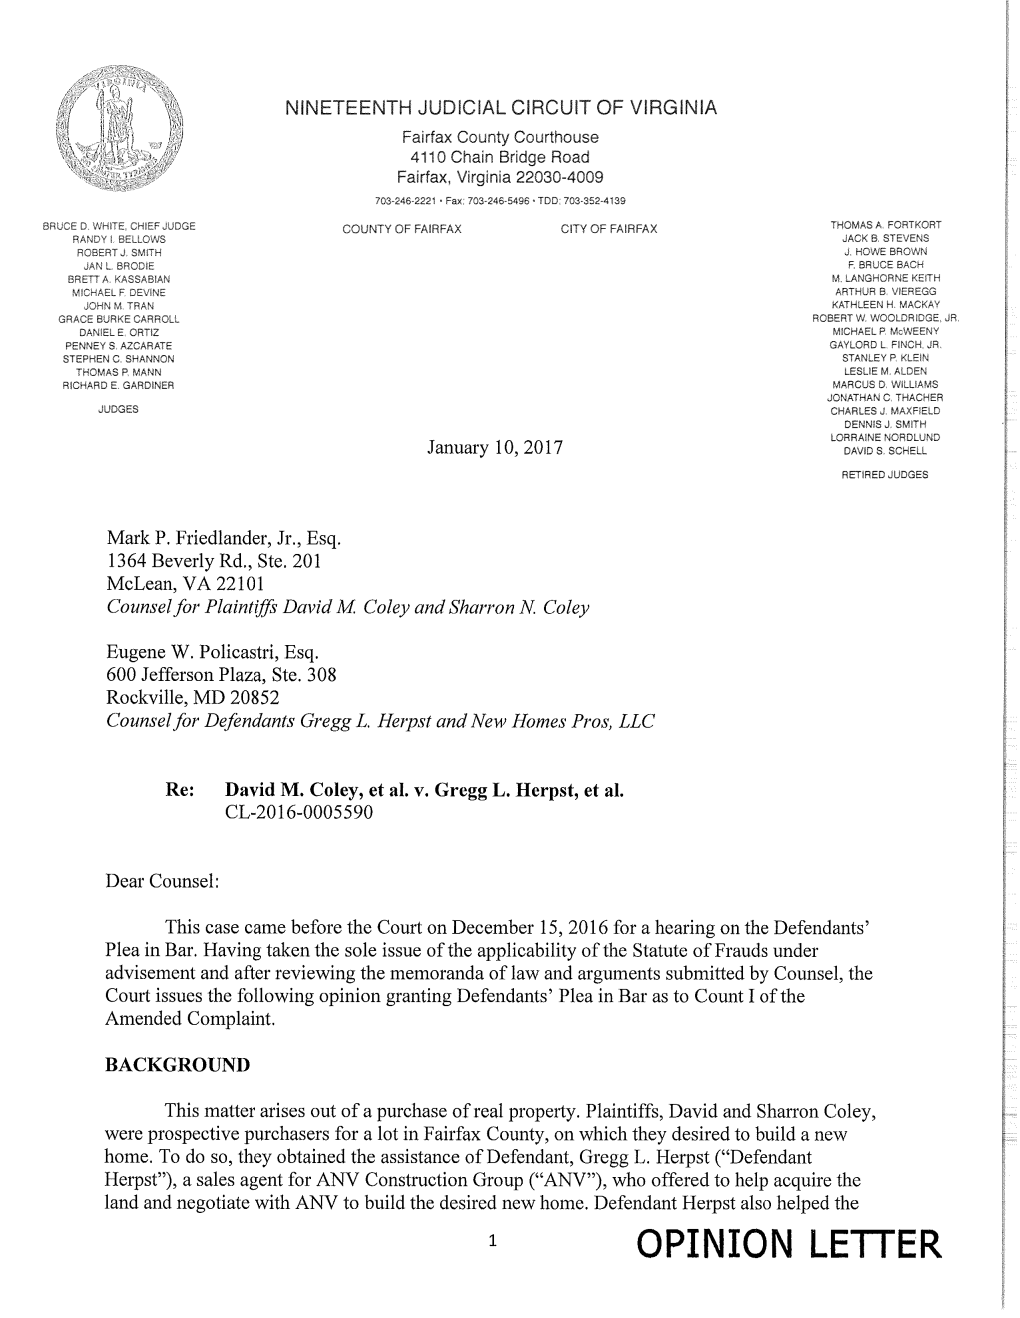 OPINION LETTER Plaintiffs to Obtain Financing for the Land and New Construction